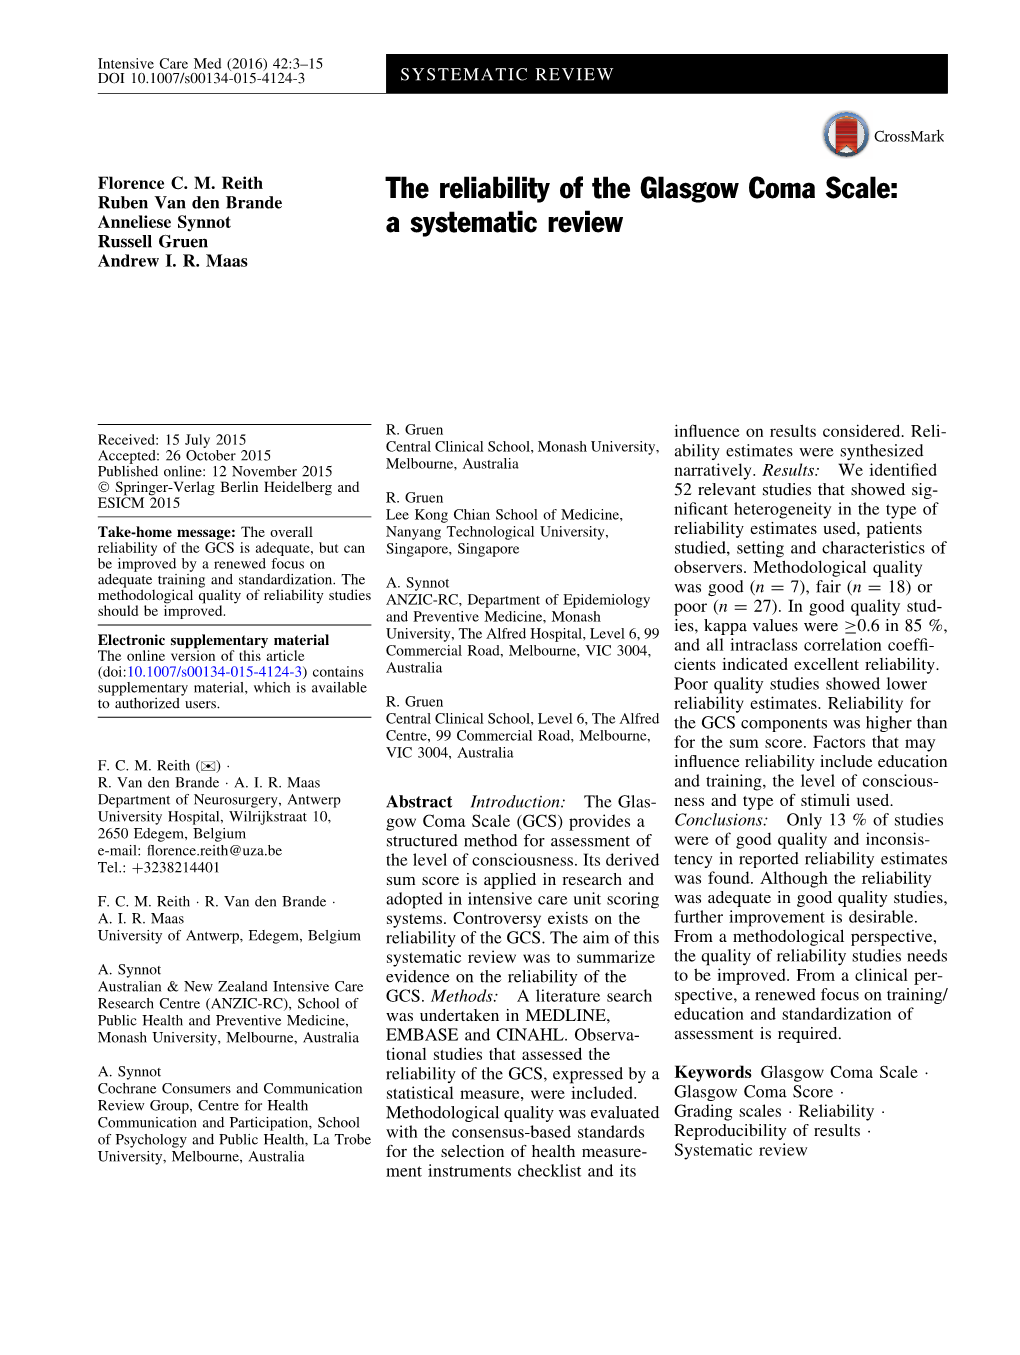 The Reliability of the Glasgow Coma Scale: a Systematic Review